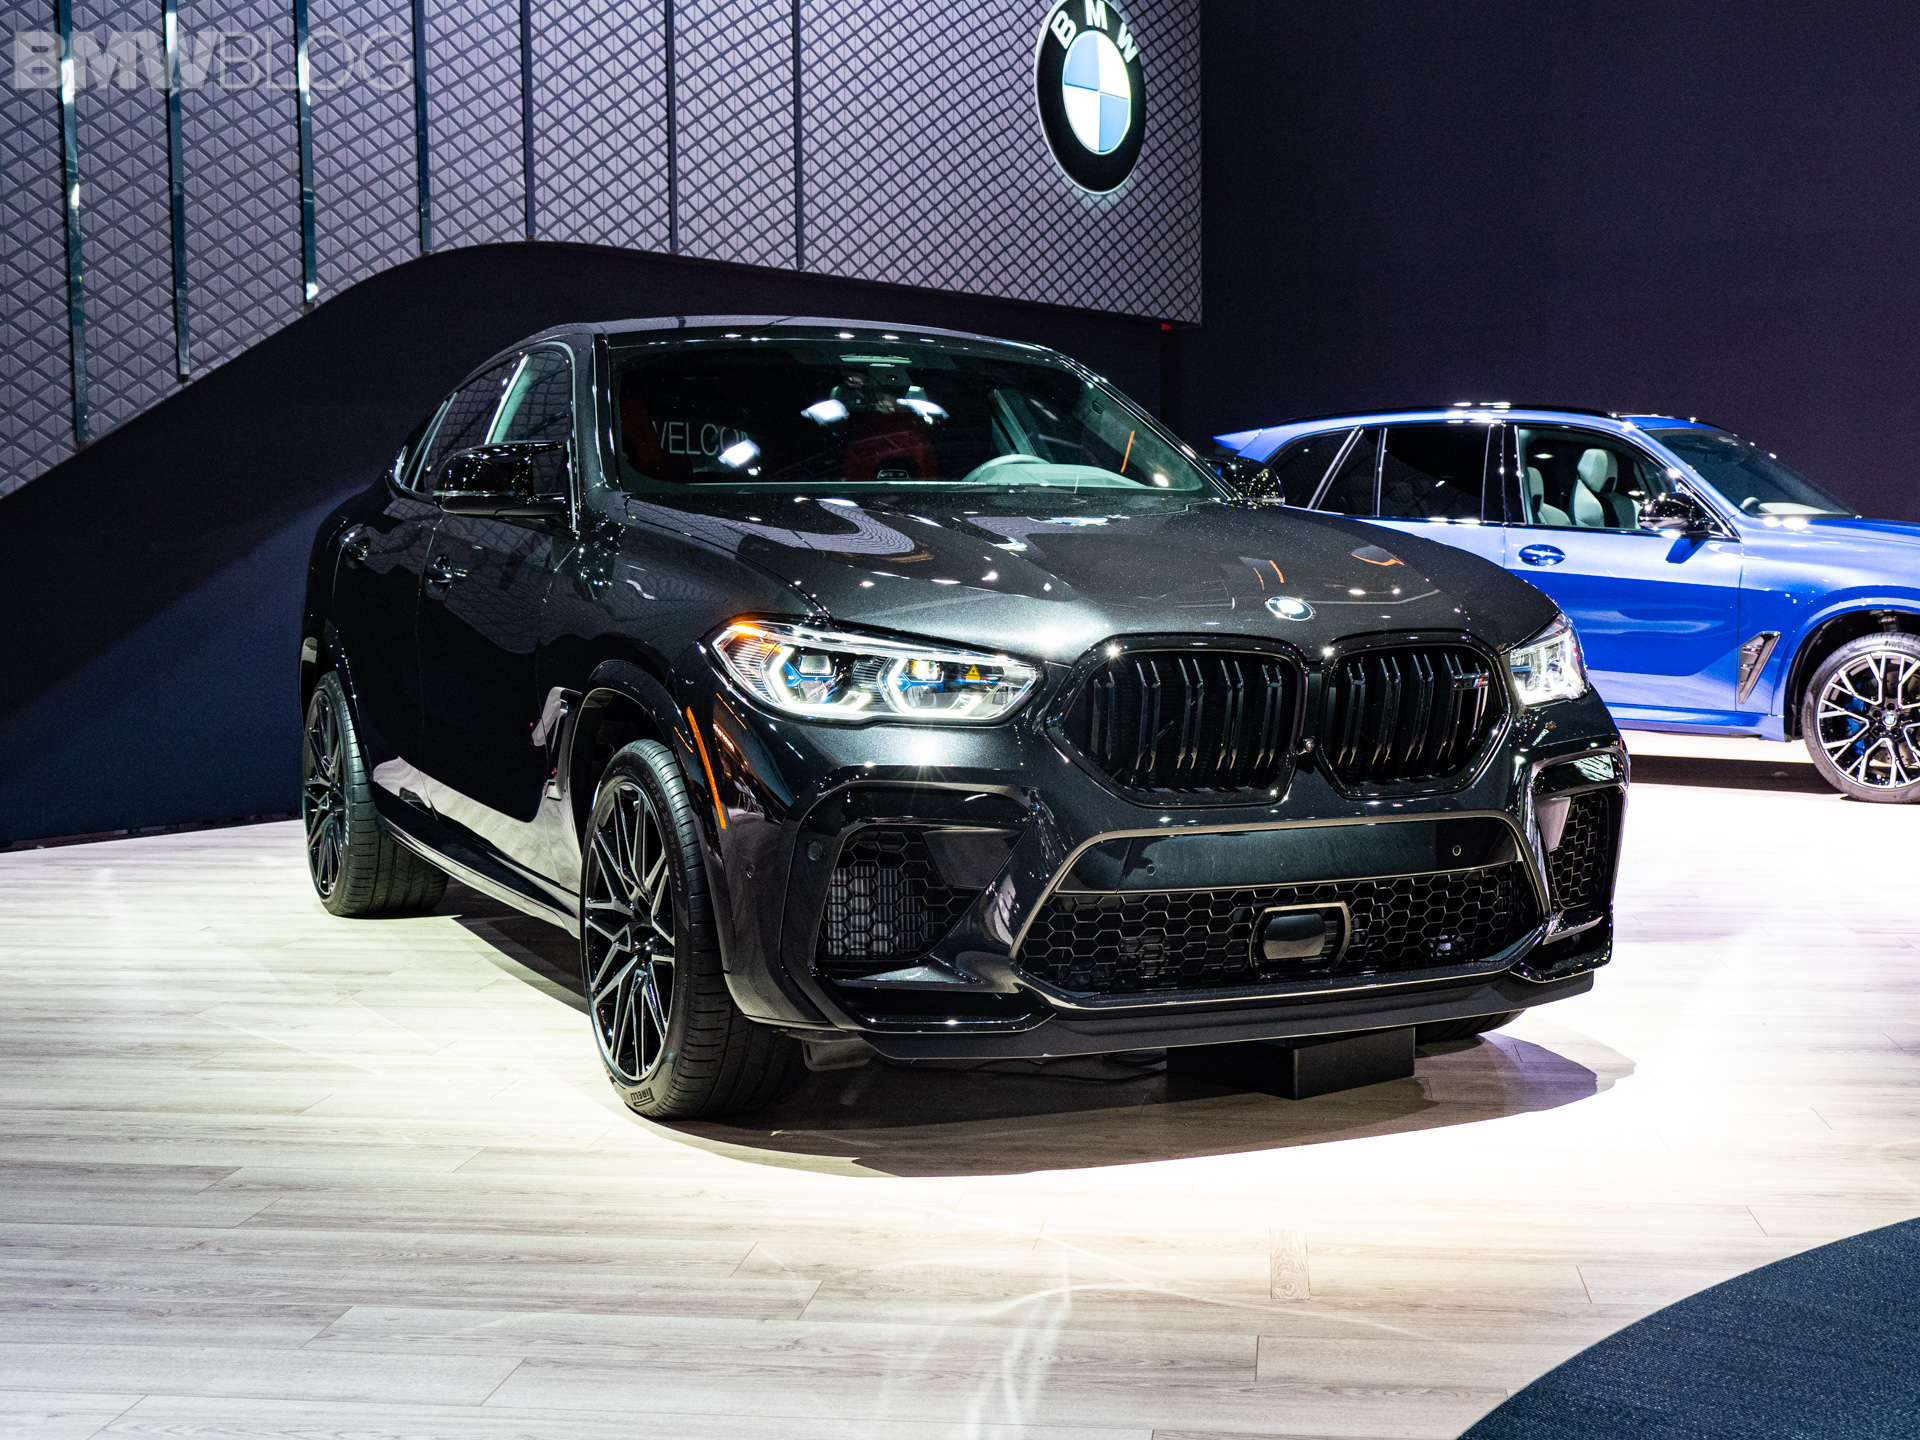 X6 2019. БМВ x6m 2019. BMW x6 2019 дизель. BMW x6 2021. BMW x6 m Competition.